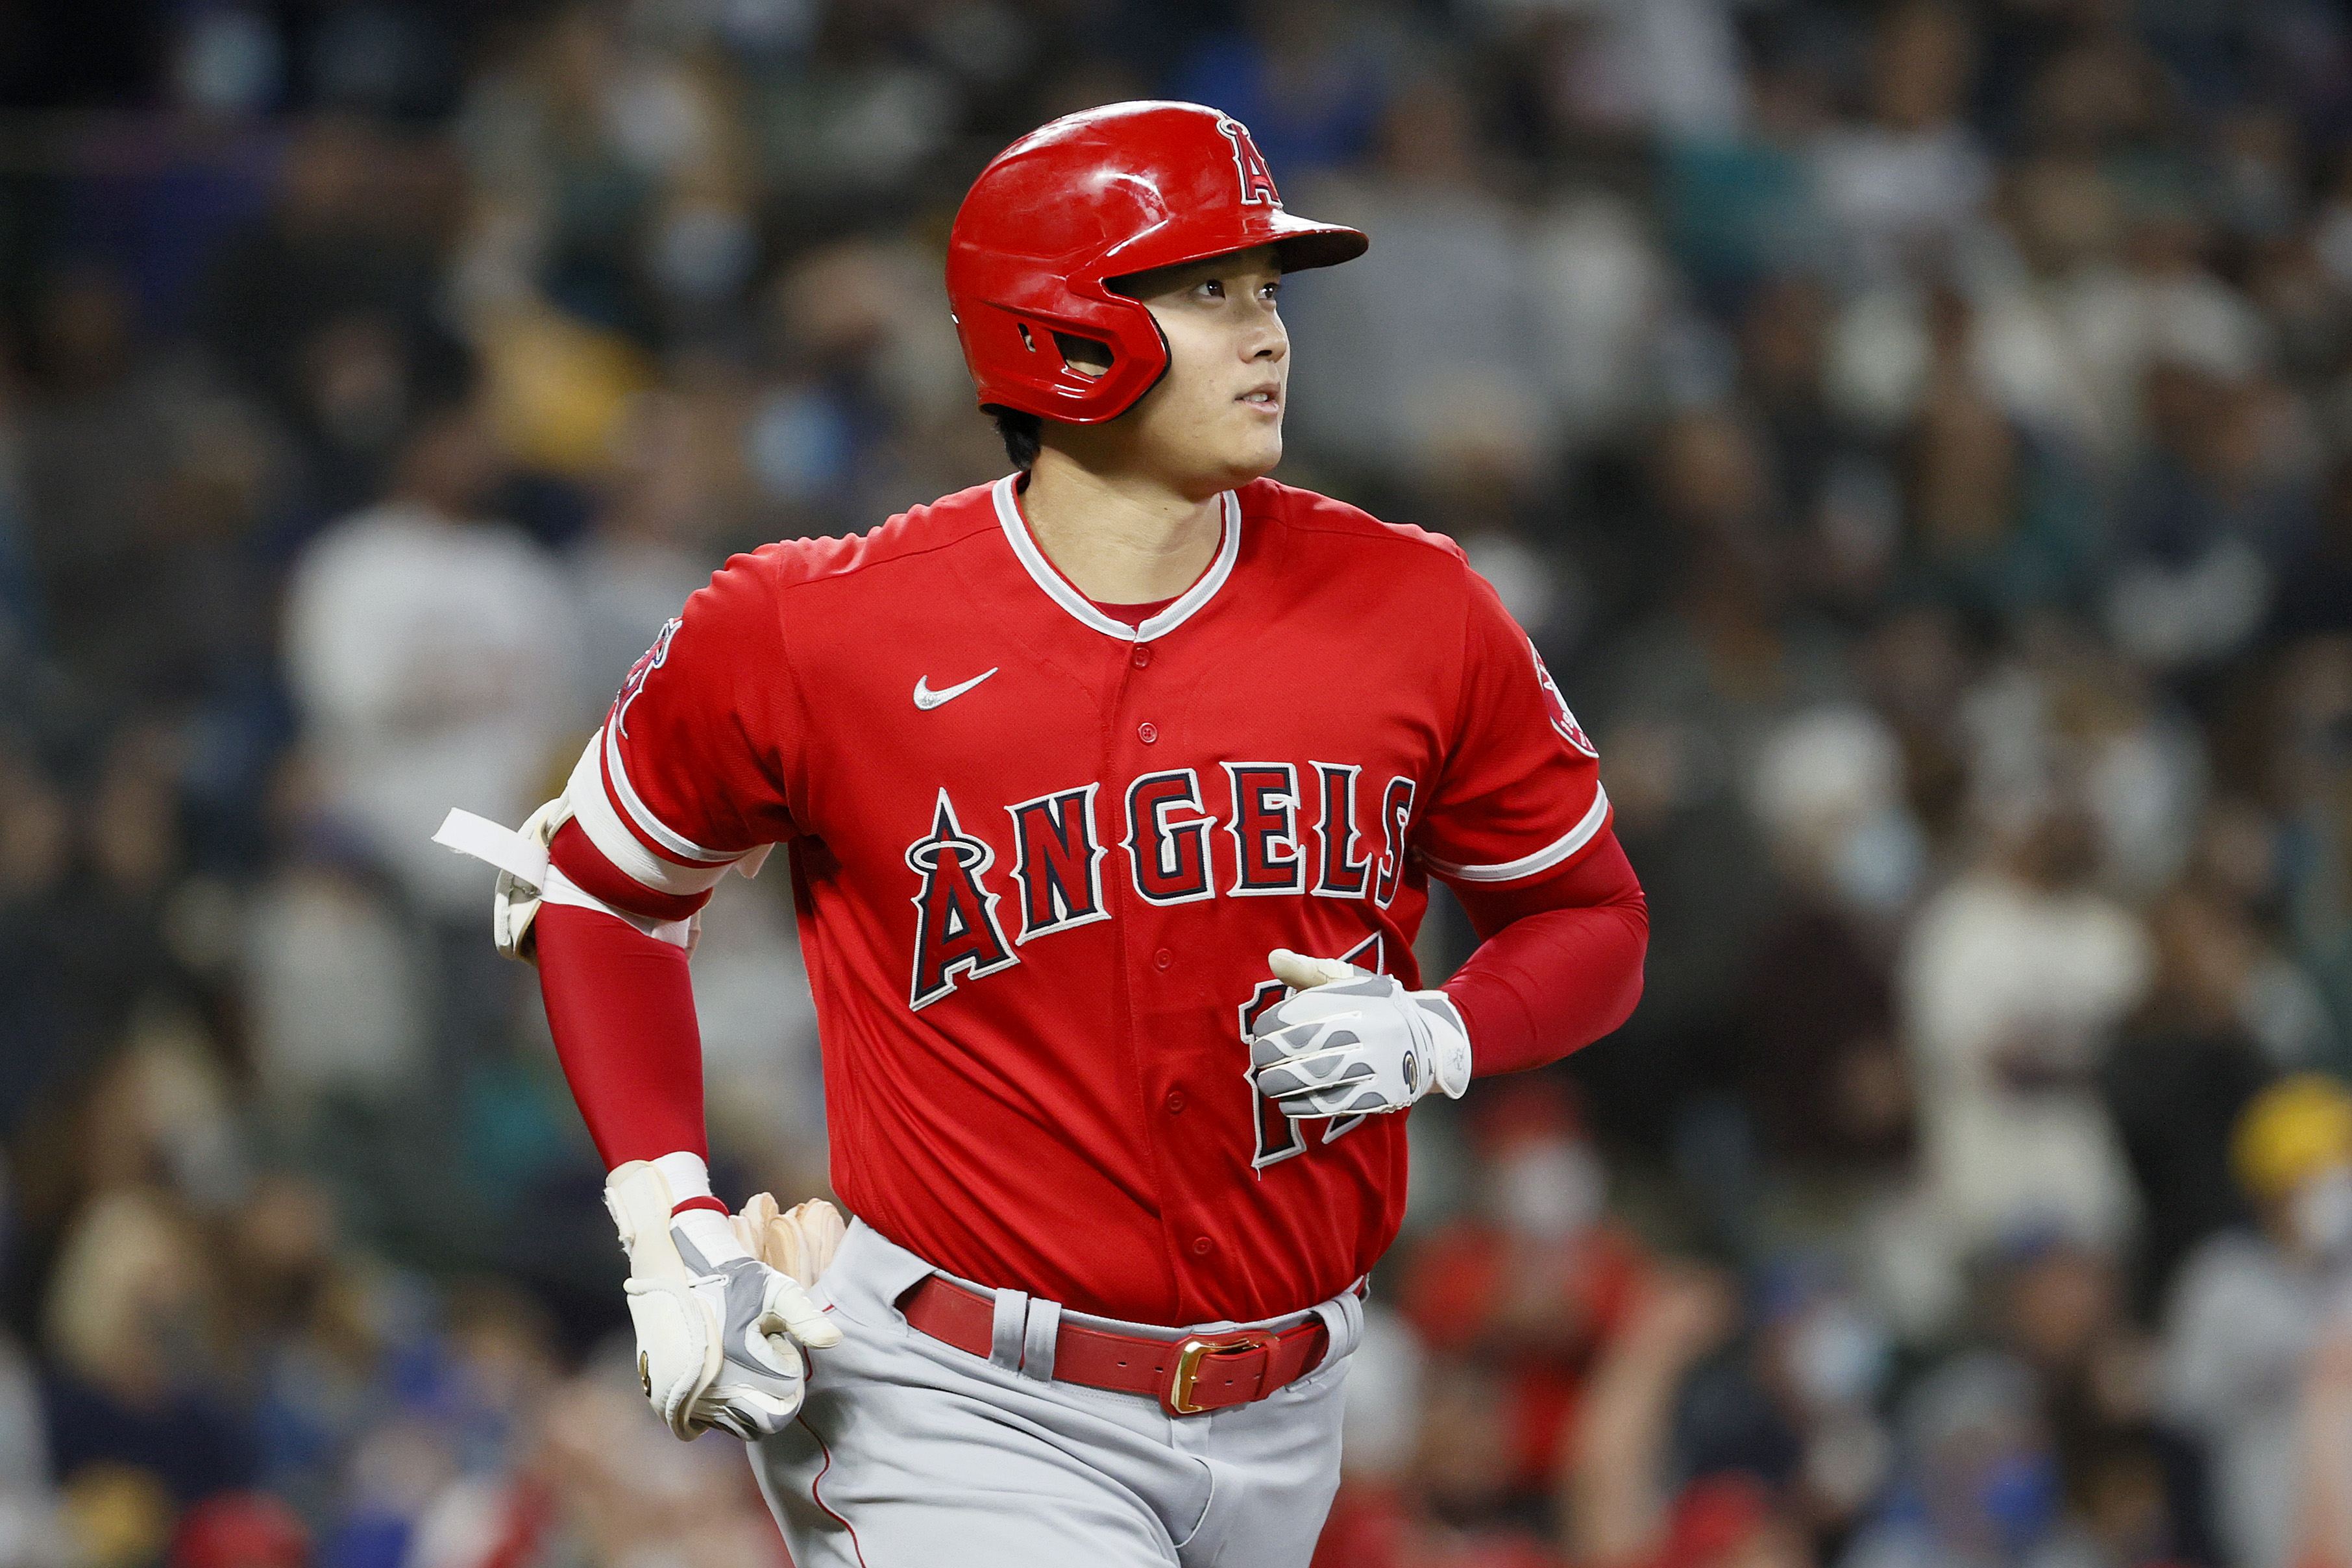 Shohei Ohtani #17 of the Los Angeles Angels watches his home run against the Seattle Mariners during the first inning at T-Mobile Park on October 03, 2021 in Seattle, Washington.